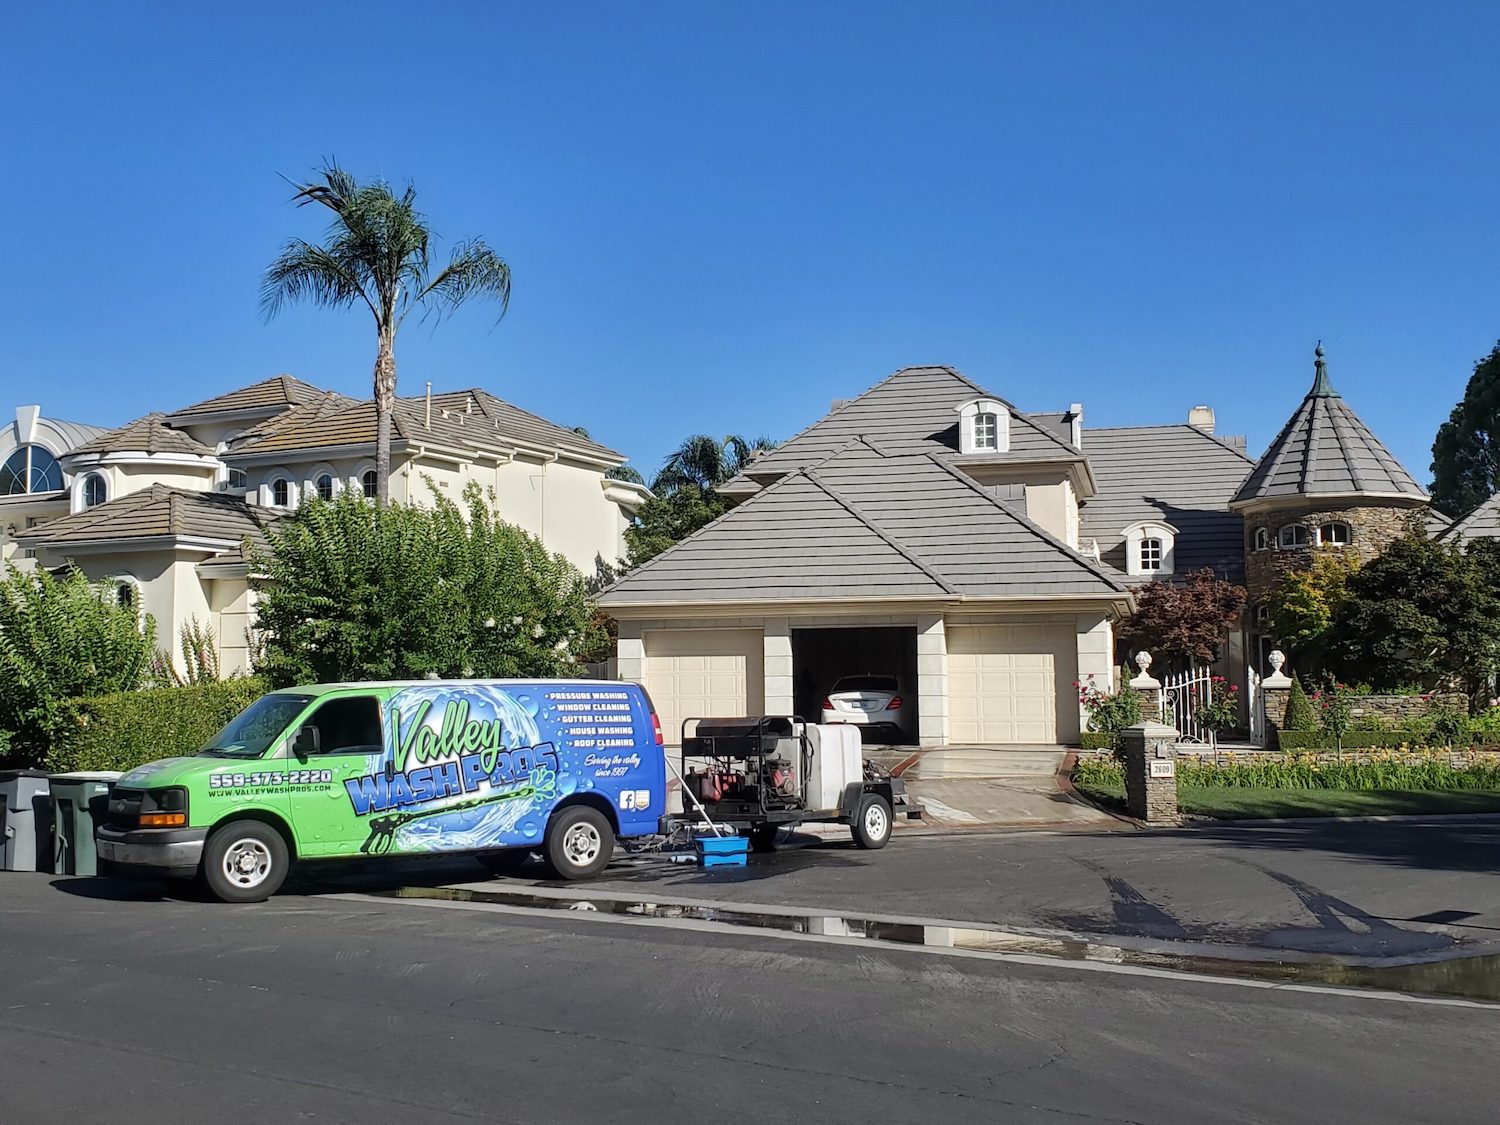 local gutter cleaning company